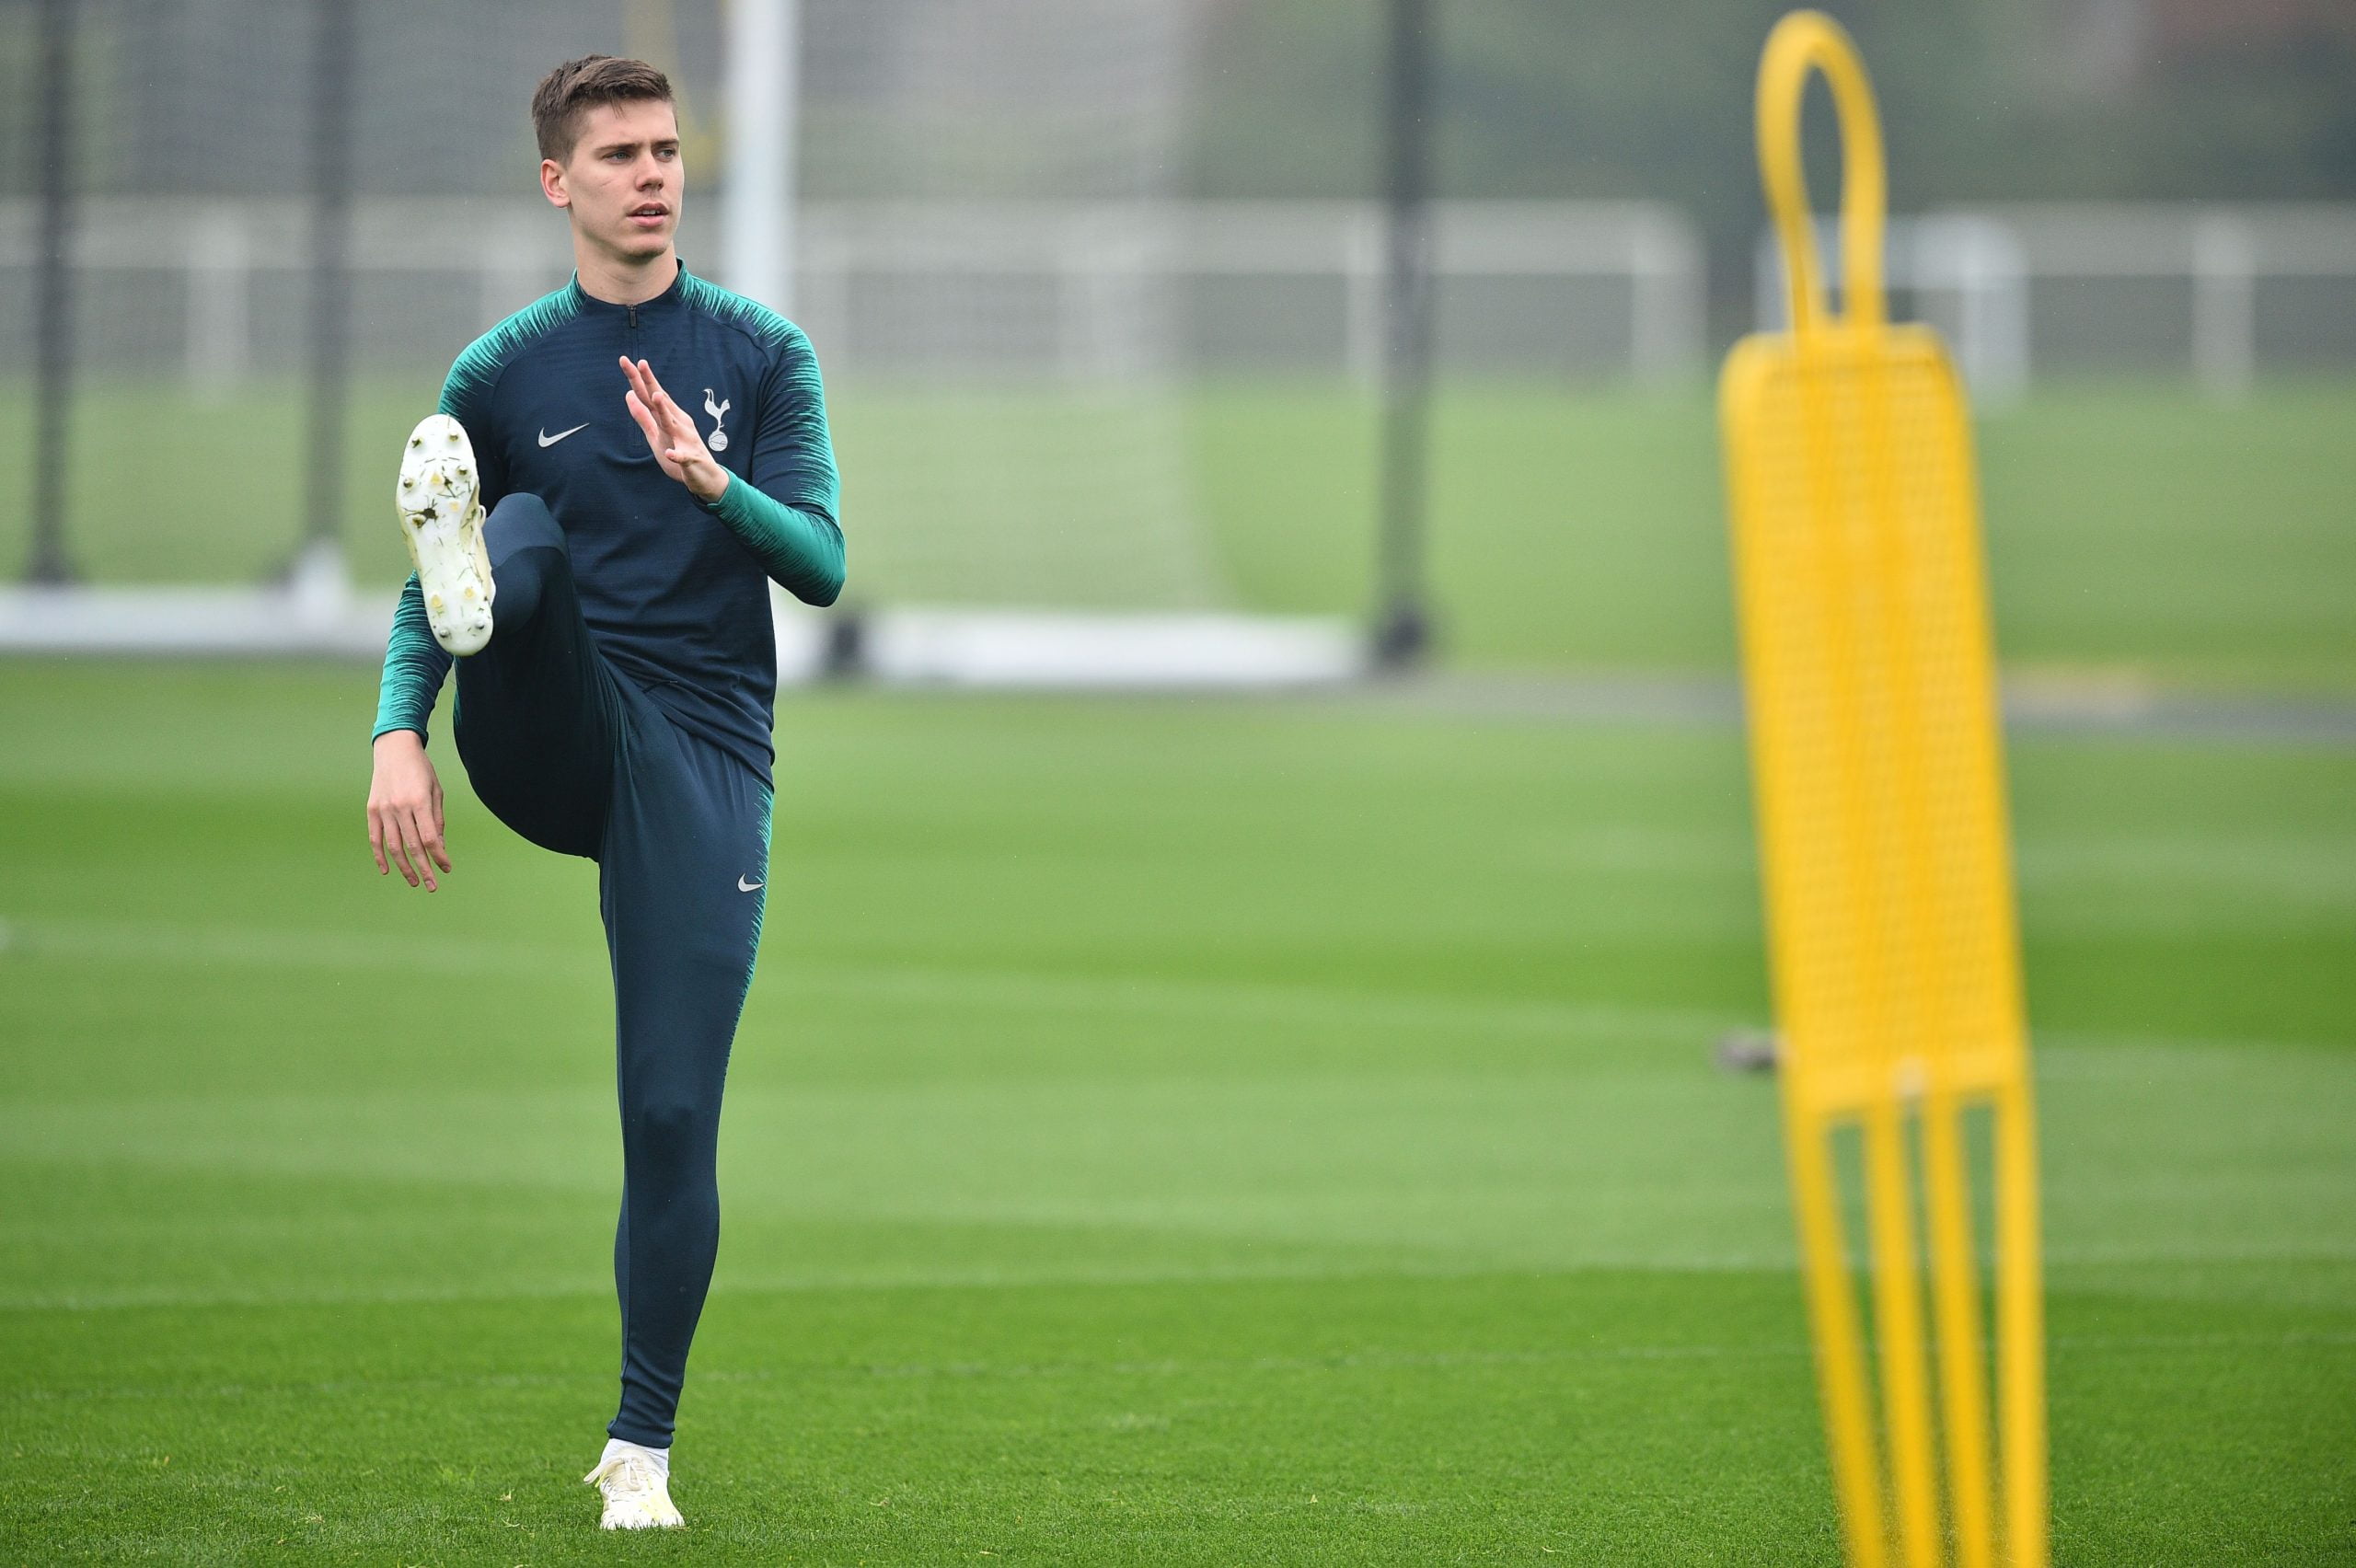 Tottenham Hotspur's Argentinian defender Juan Foyth takes part in a training session on the eve of their UEFA Champions league quarter final football match against Manchester City on April 8, 2019 in London. (Photo by Glyn KIRK / AFP)        (Photo credit should read GLYN KIRK/AFP/Getty Images)